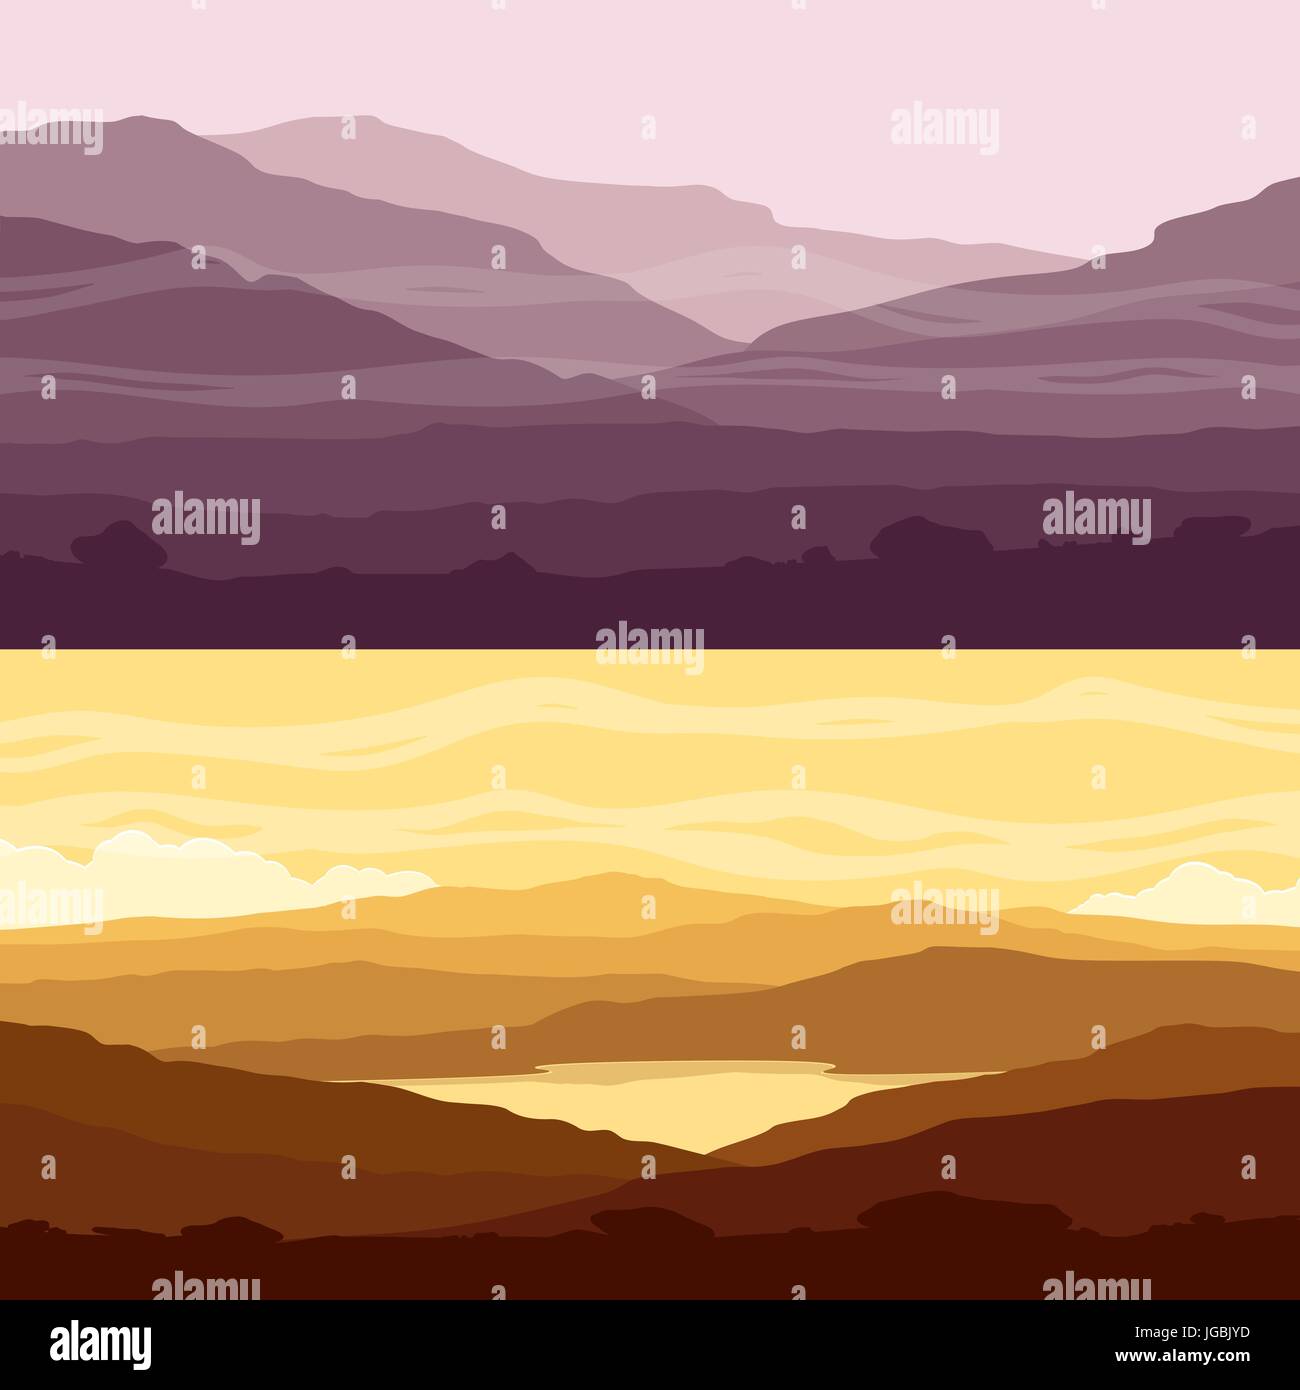 Set of Mountain landscapes Stock Vector